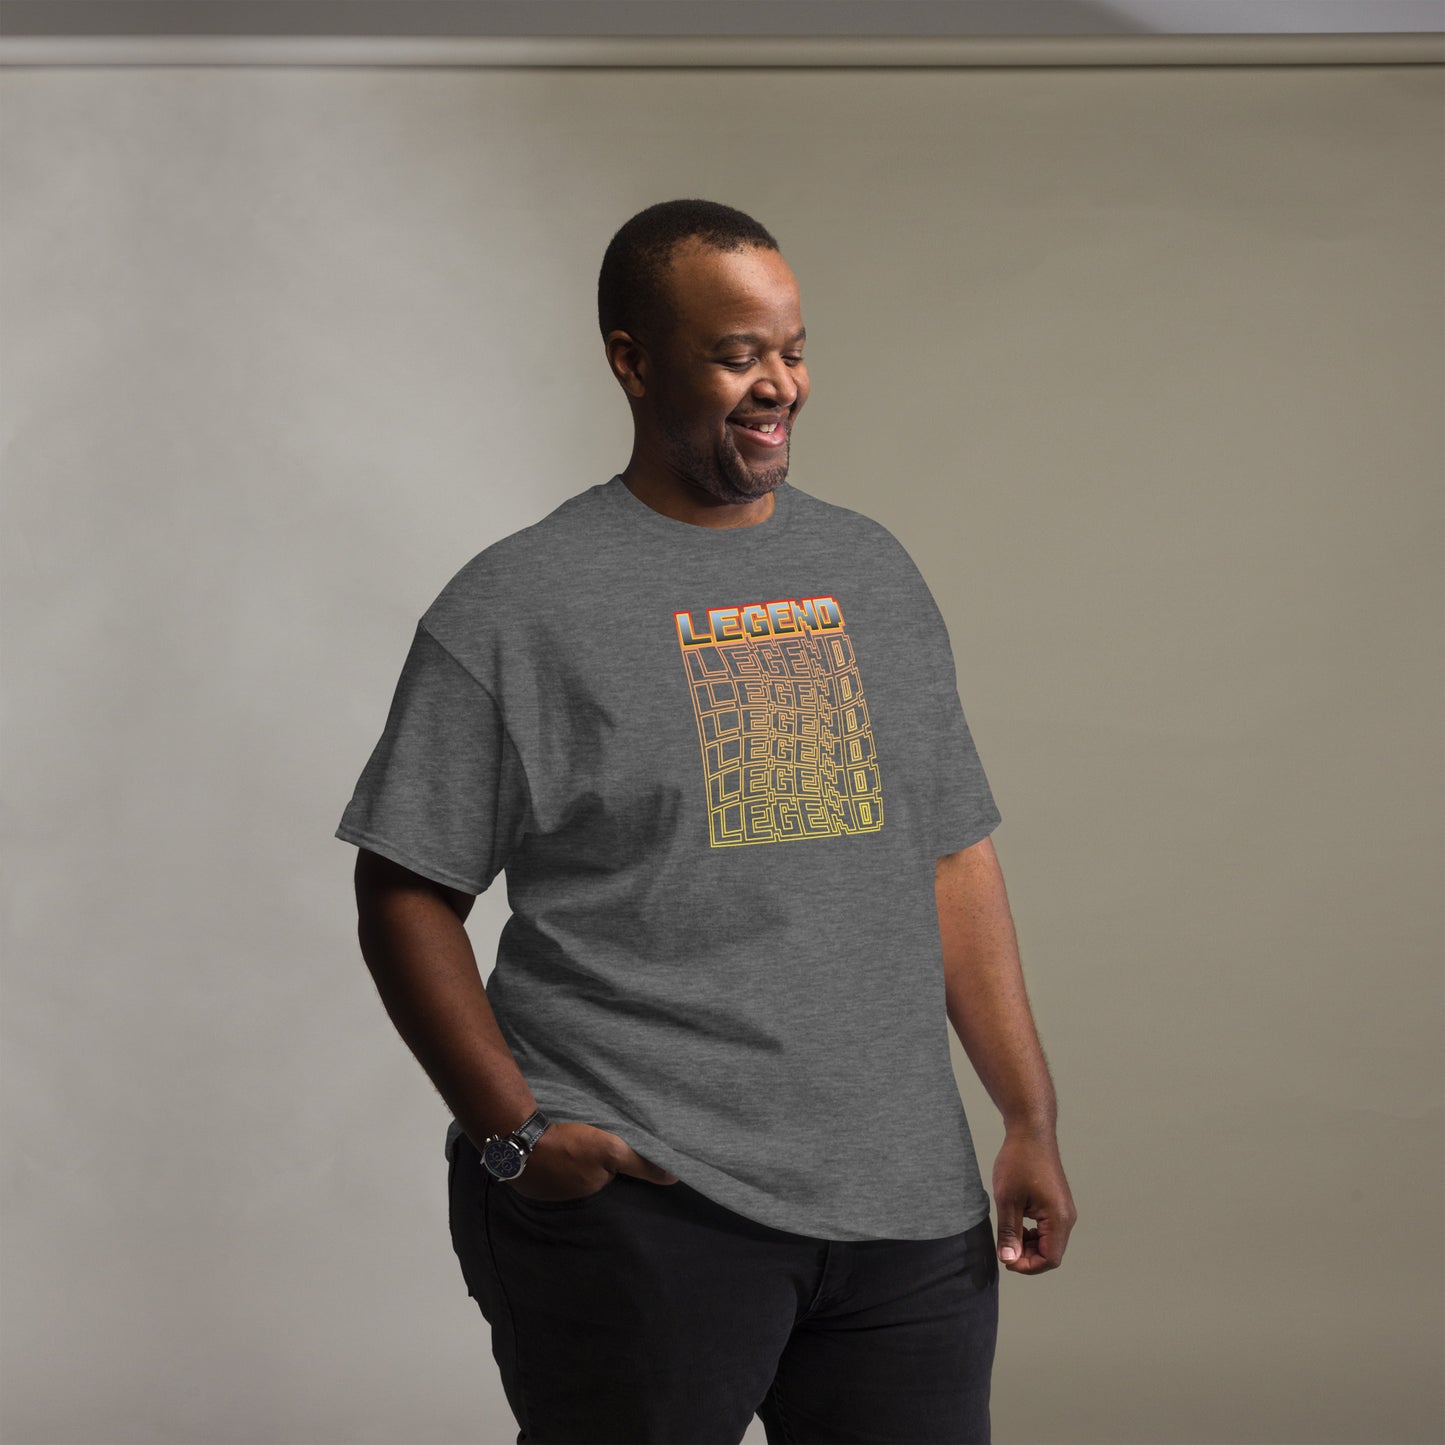 Man smiling and standing casually in a grey t-shirt featuring a pixel-style 'LEGEND' text in an orange to yellow gradient with a digital cube illusion, complemented by a simple grey background.